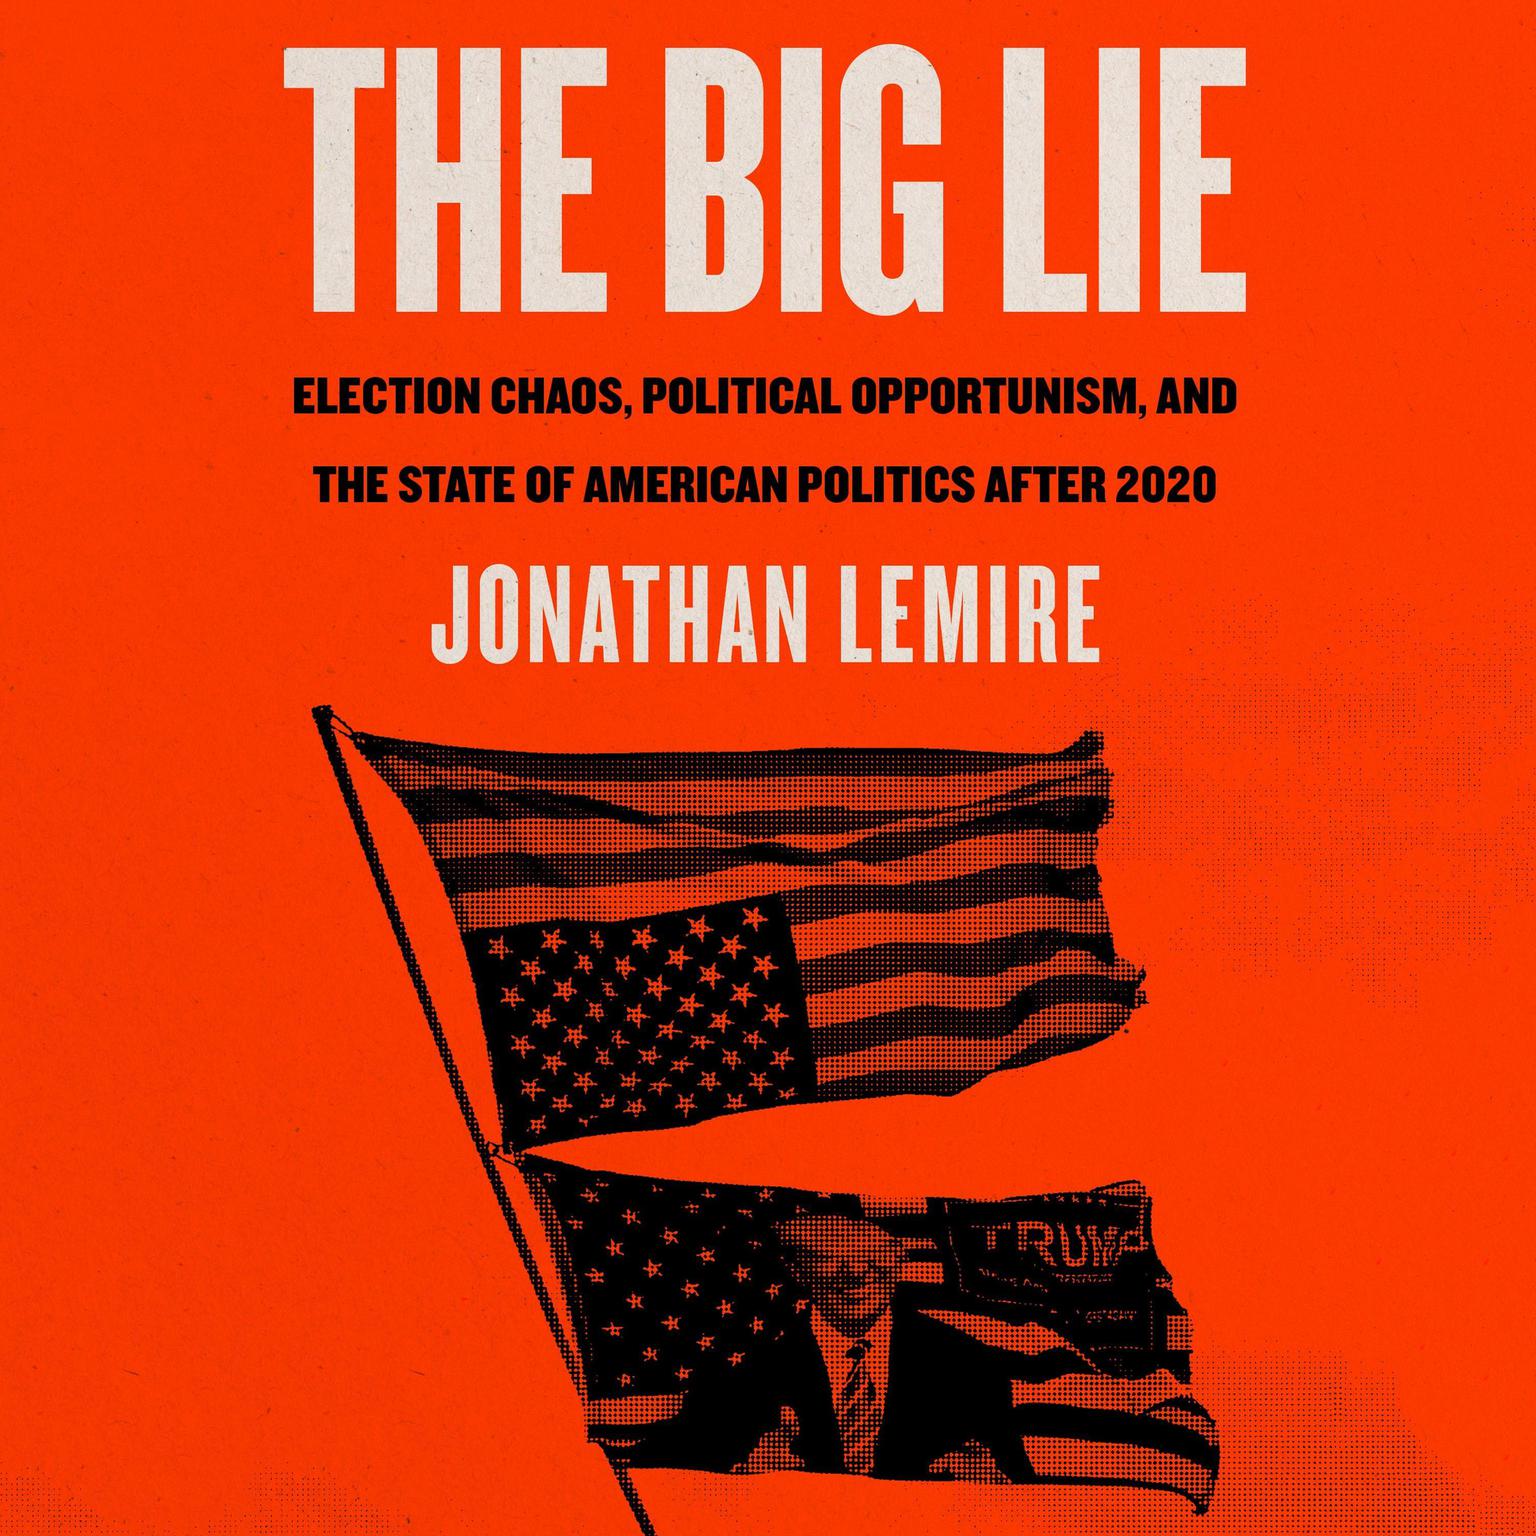 The Big Lie: Election Chaos, Political Opportunism, and the State of American Politics After 2020 Audiobook, by Jonathan Lemire